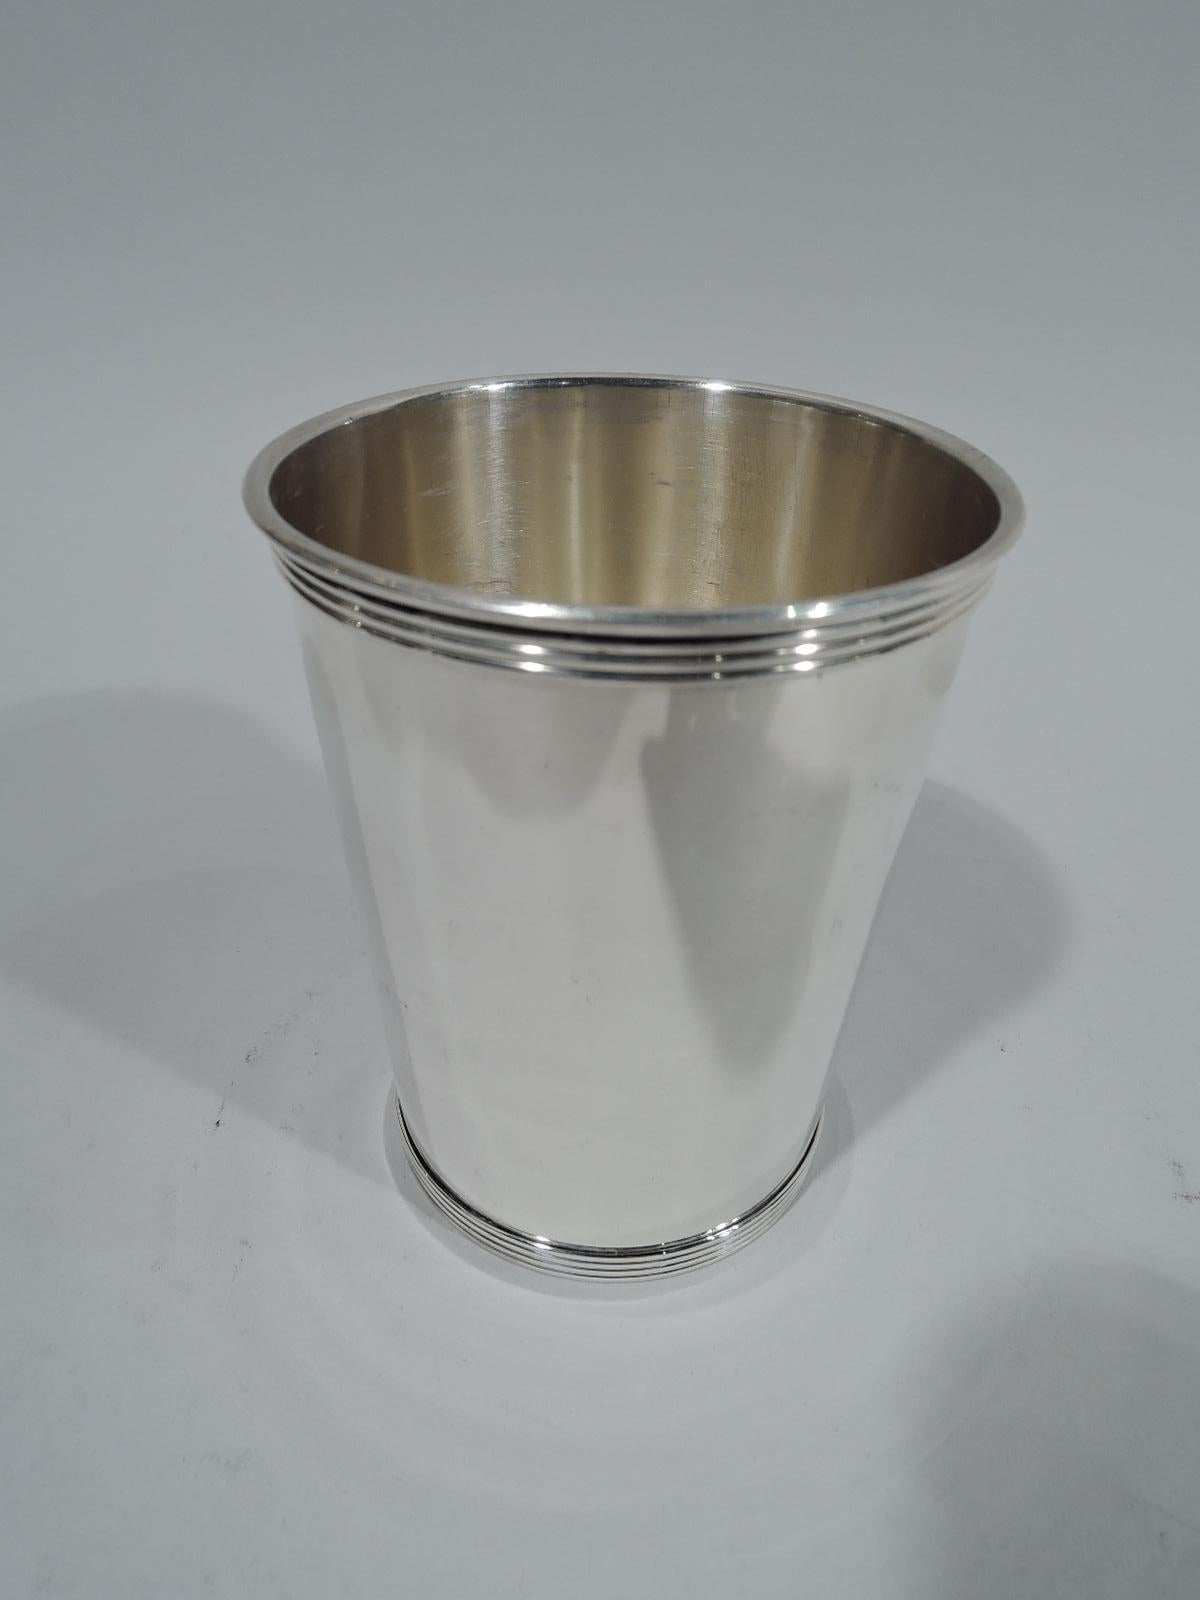 Pair of sterling silver mint julep cup. Straight and tapering sides, and reeded rim and foot. Fully marked including retailer’s stamp for AJ Winters Co., which was located in Paris, Kentucky. Weight: 7.5 troy ounces.